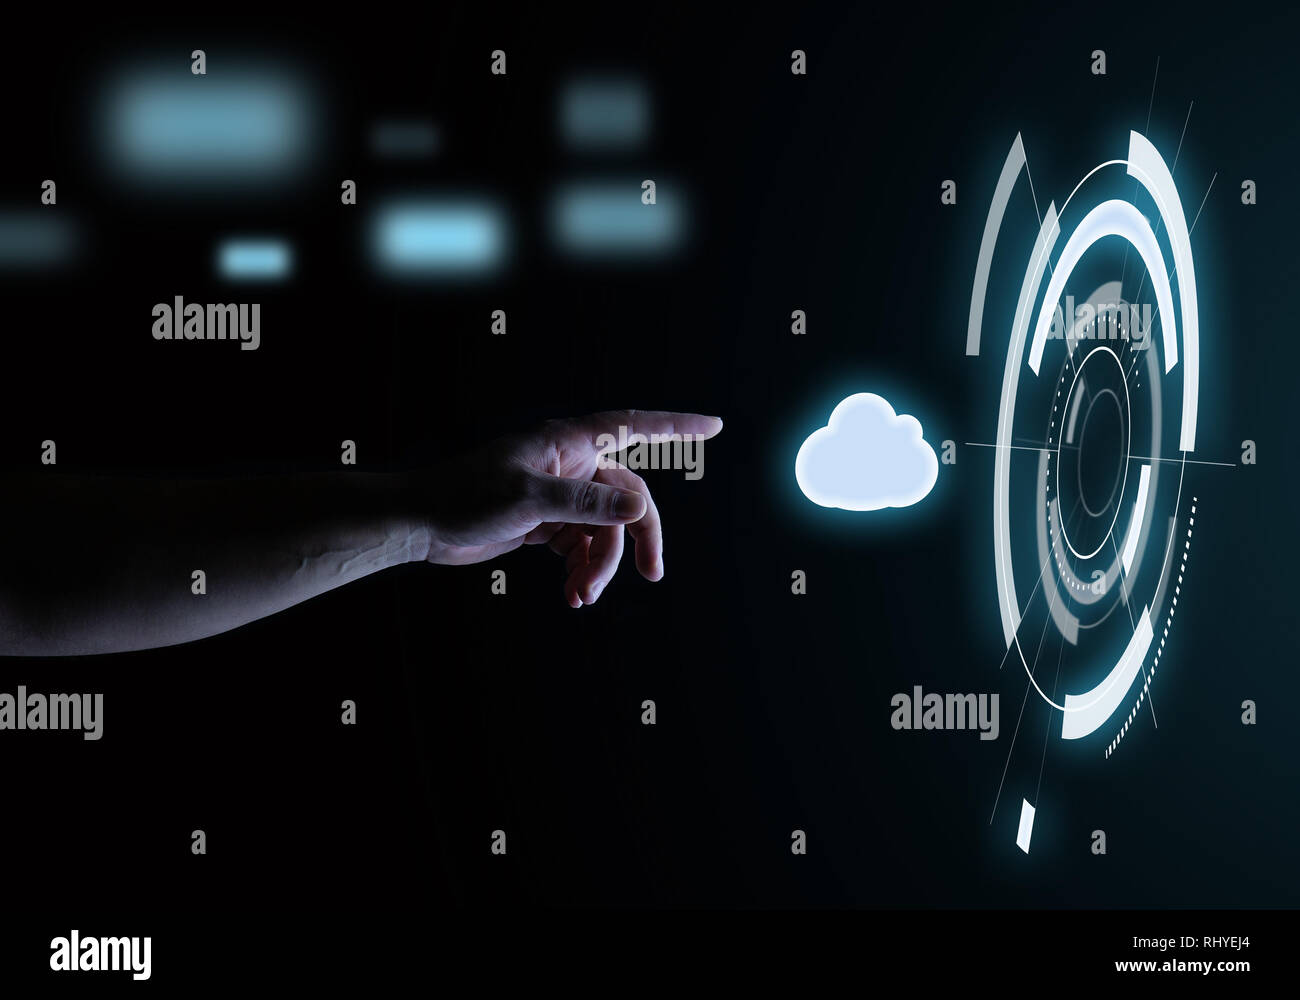 Cloud Technology Digital Touch Hologram User Interface Technology Concept Stock Photo